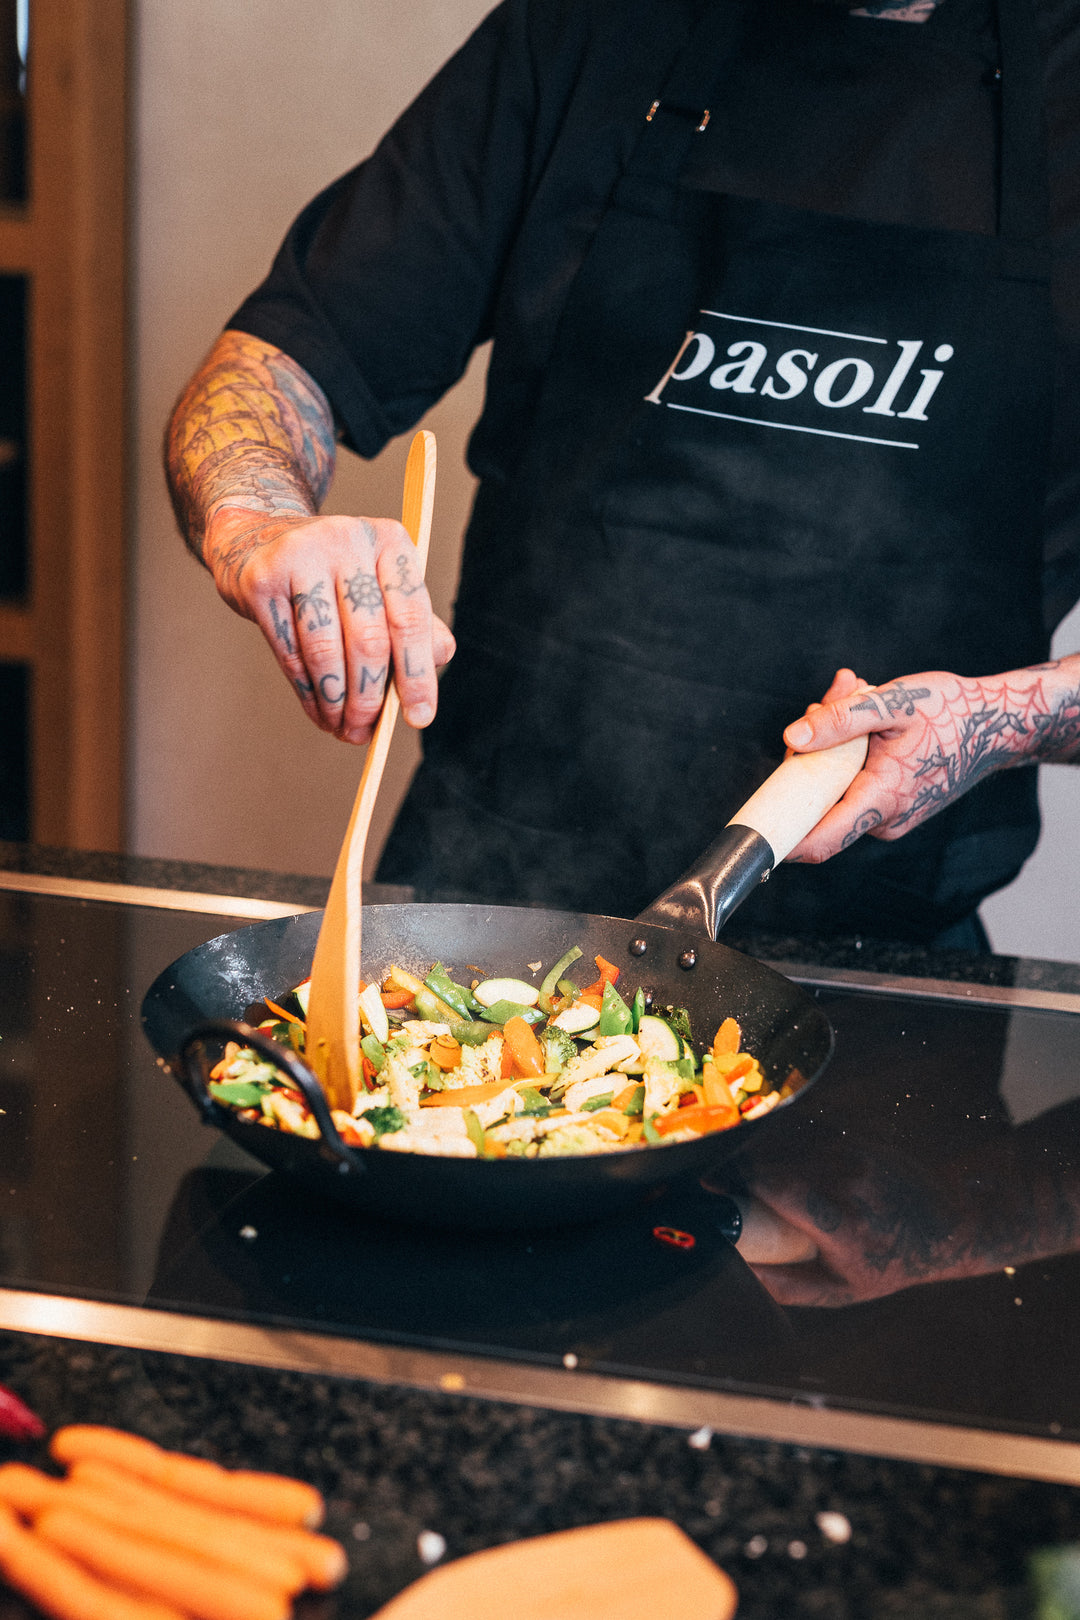 Our professional chef Mane roasts vegetables in our pasoli wok.